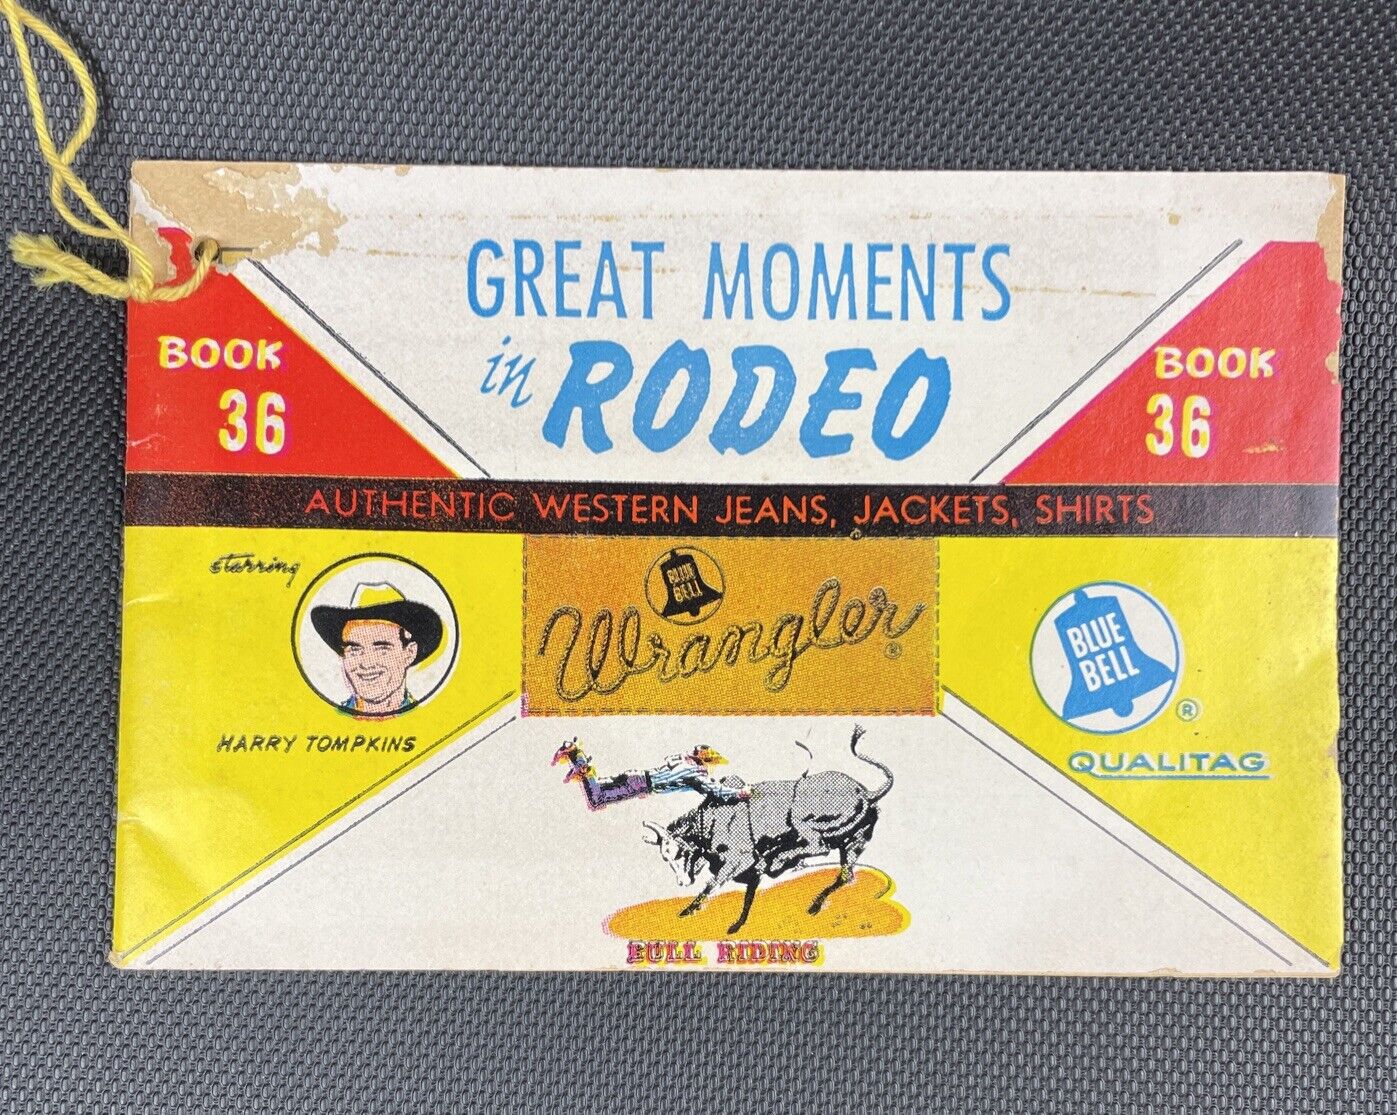 Vintage Rare 1961 Wrangler BLUE BELL Great Moments in Rodeo Book 36 Bull Riding